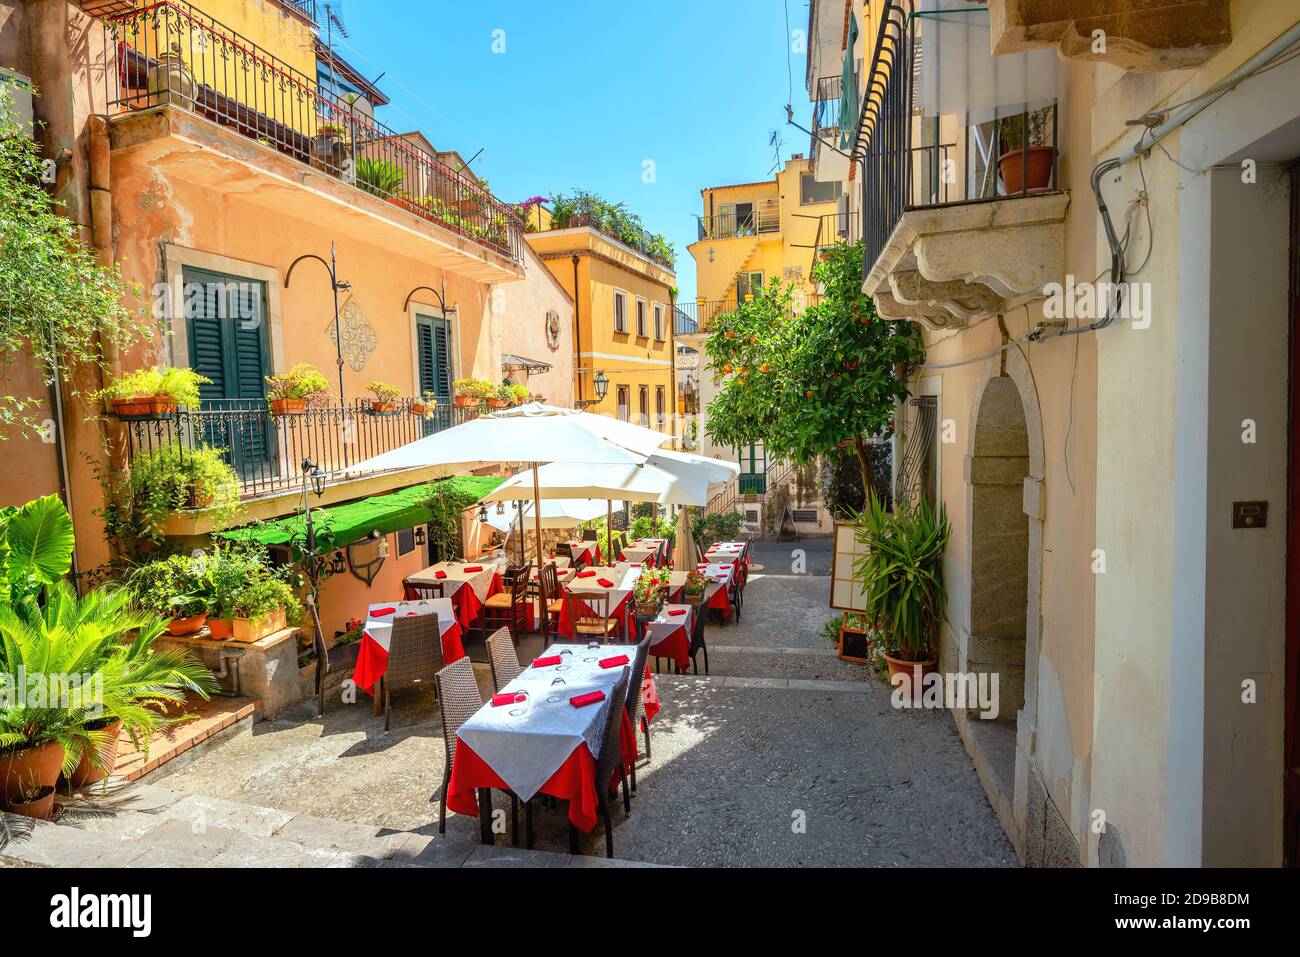 View of colorful narrow pedestrian street with cafe in old town Taormina. Sicily, Italy Stock Photo